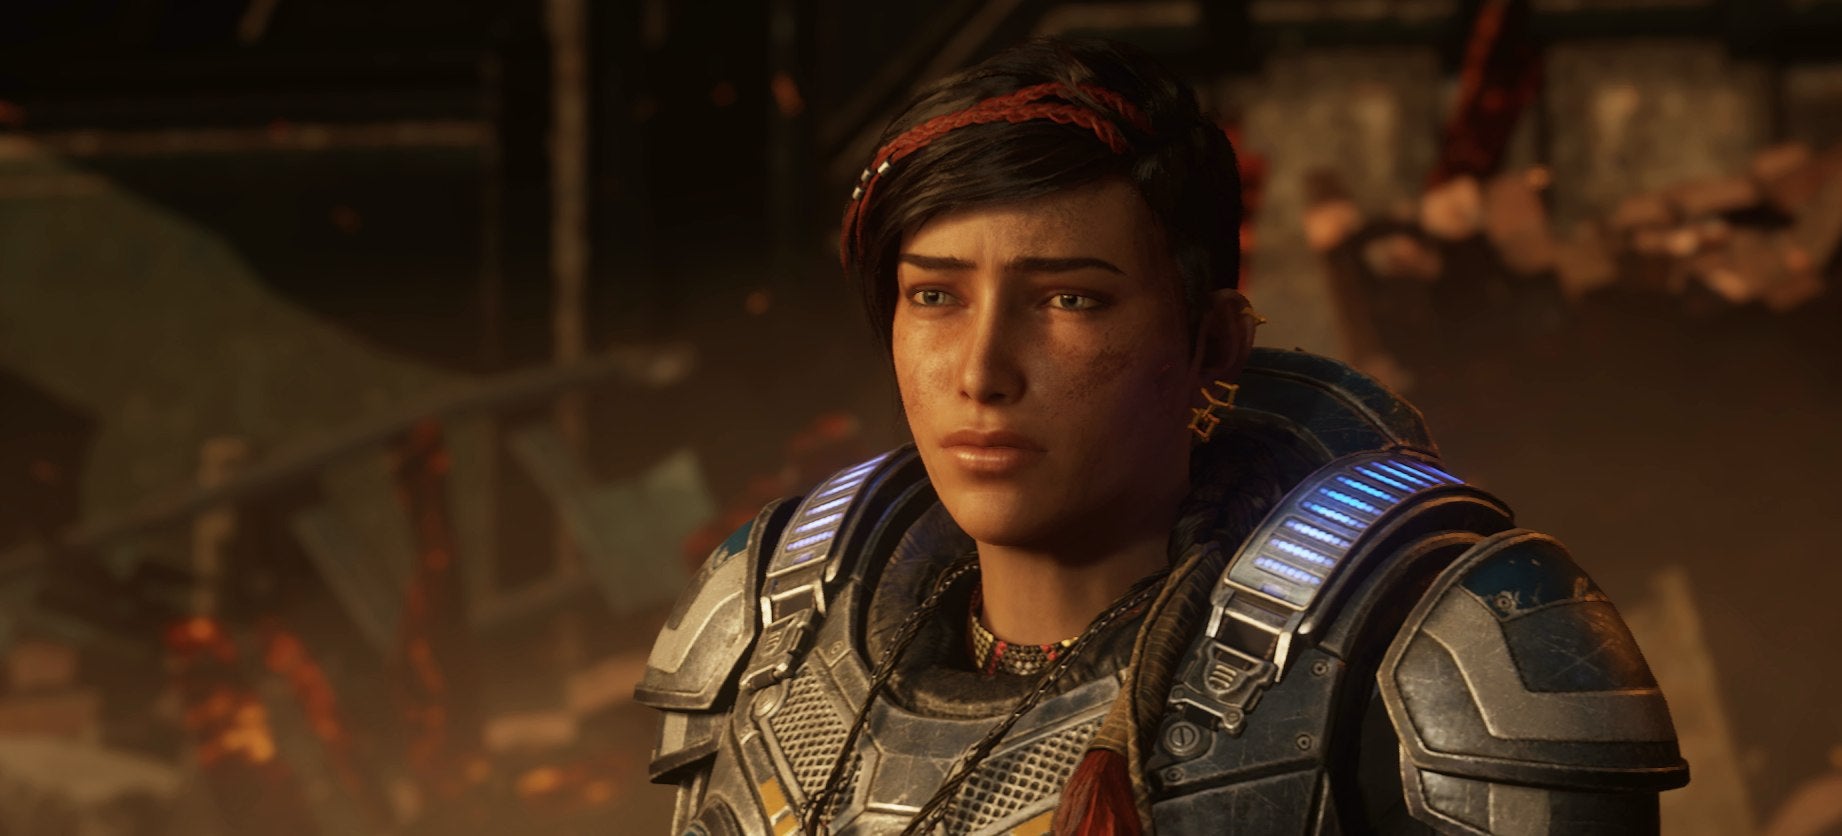 Image for Gears 5 Collectibles - How to Find All Collectible Locations